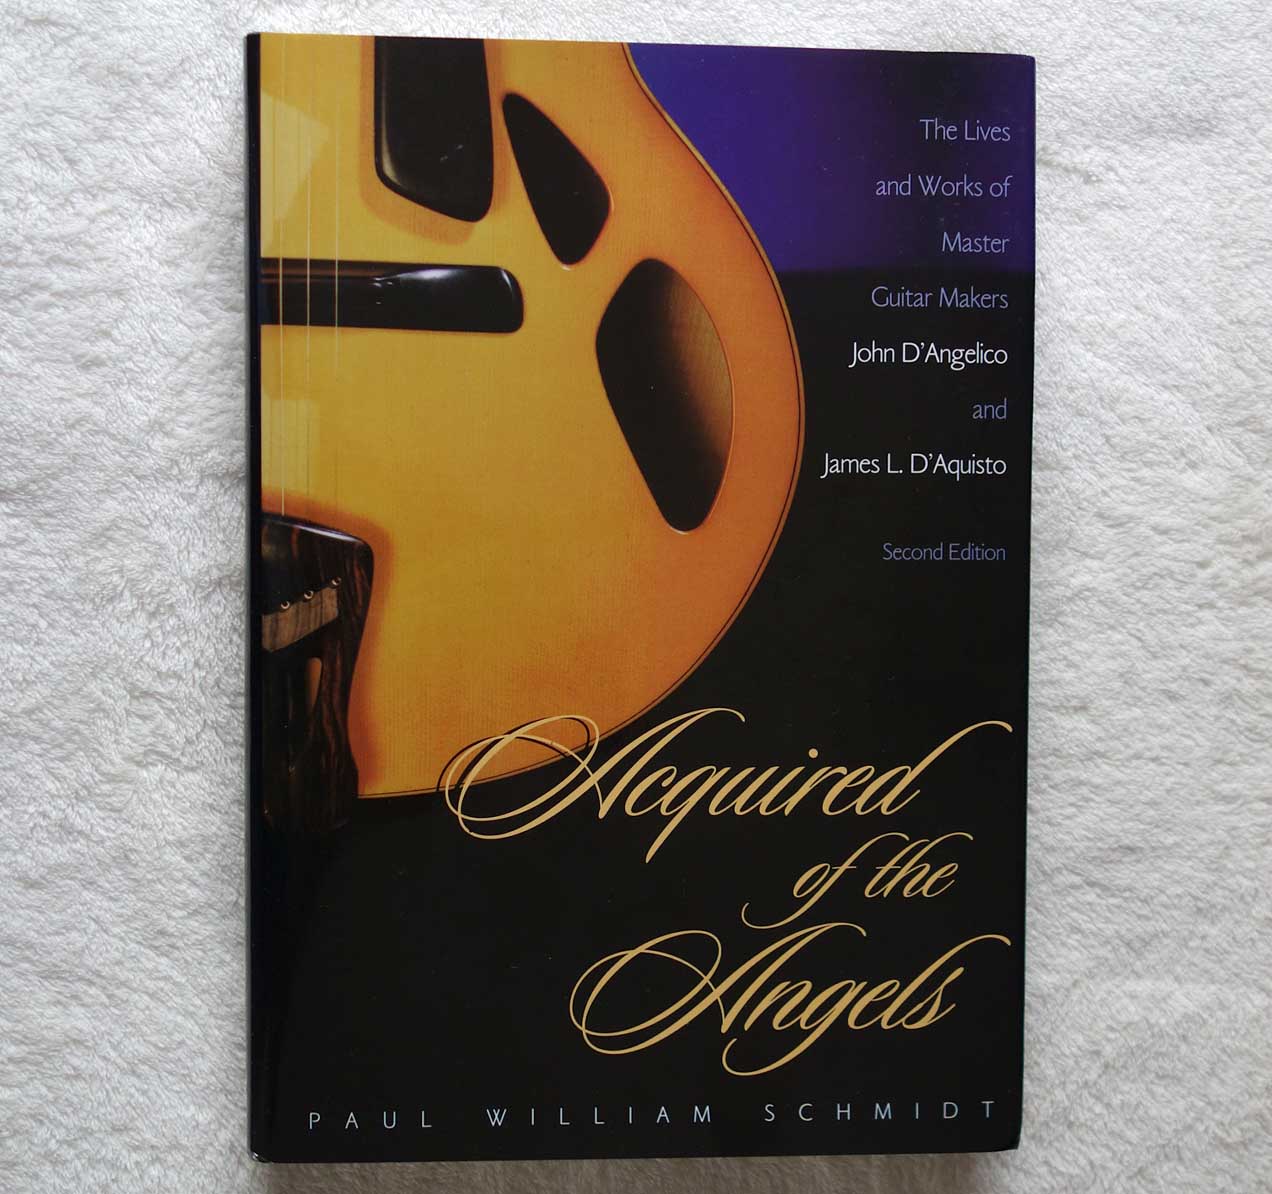 Acquired of the Angels: The Lives and Works of D'Angelico and D'Aquisto Signed by the Author, Paul Schmidt, 1998 Second Edition